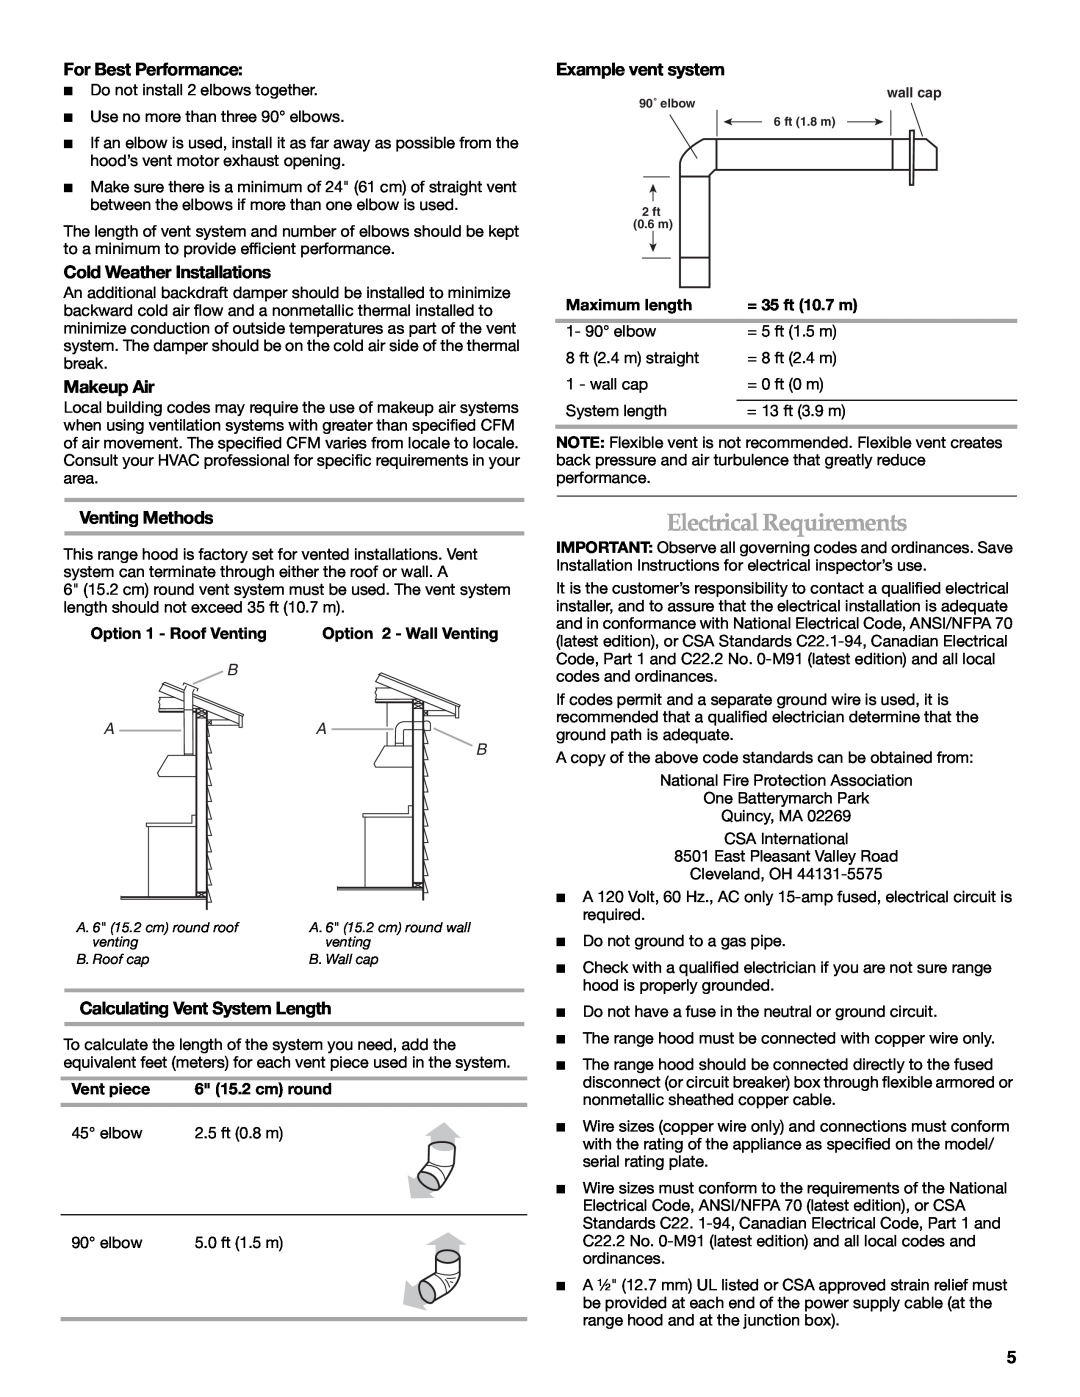 KitchenAid 2005 Electrical Requirements, For Best Performance, Cold Weather Installations, Makeup Air, Example vent system 